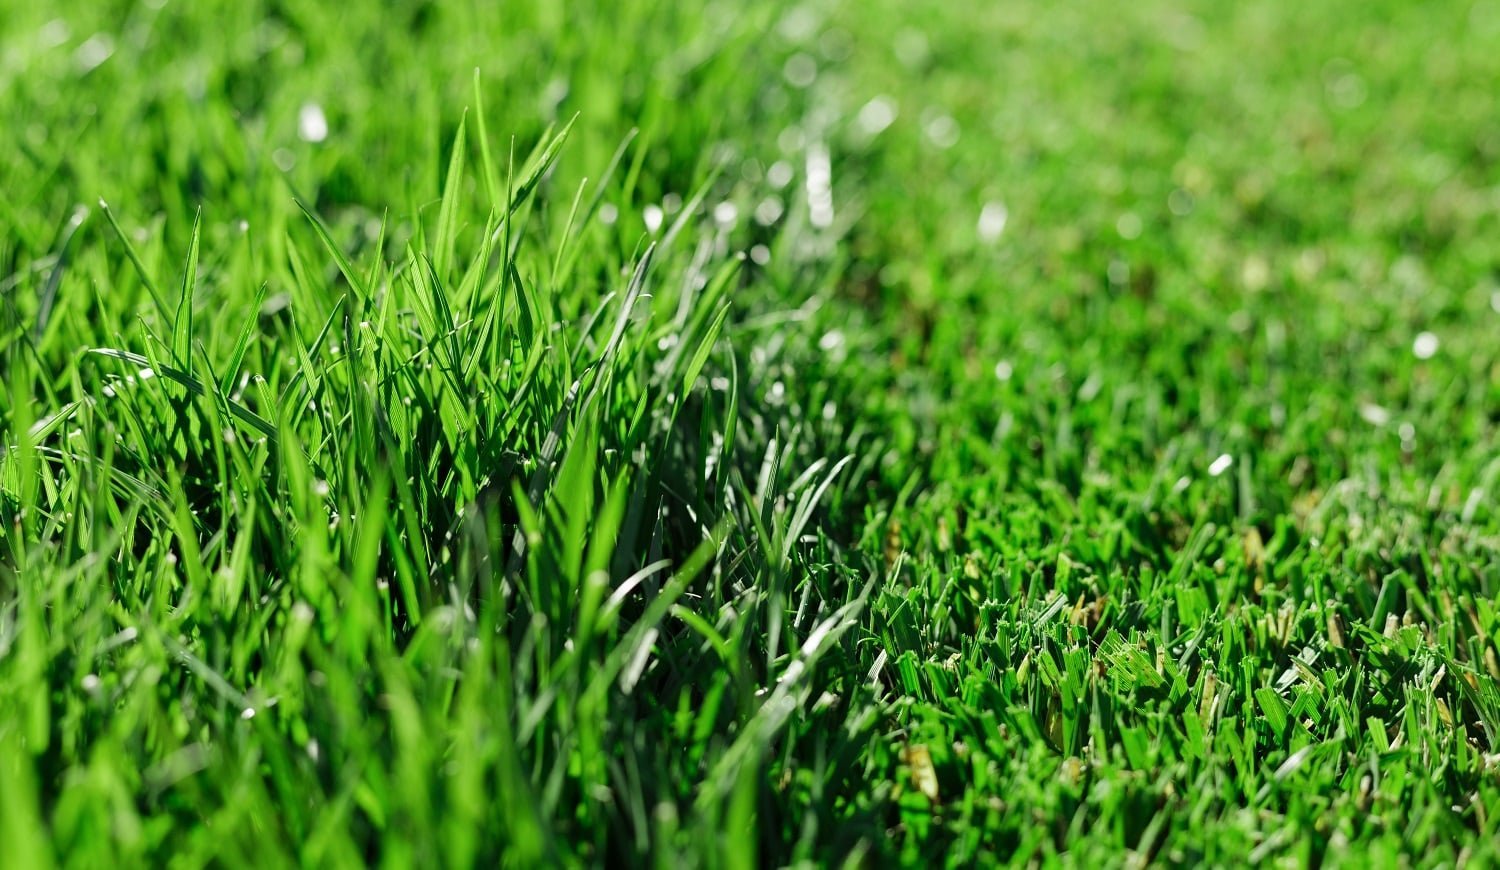 Green fresh grass. Partially cut grass lawn. Difference between perfectly mowed, trimmed garden lawn or field for sports, golf and long uncut grass. Lawn, carpet, natural green trimmed grass field